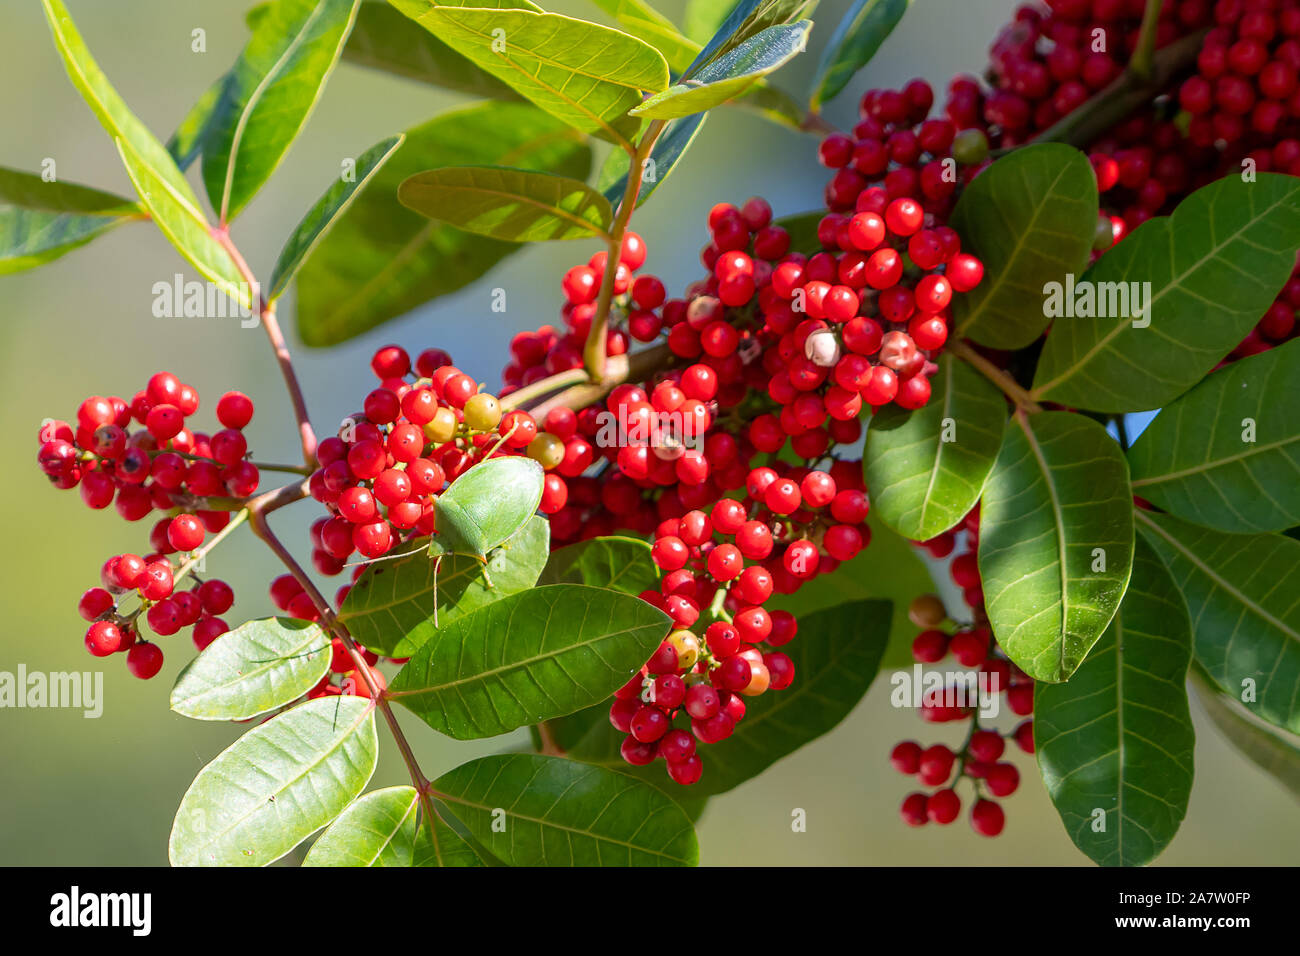 Bush with red berries in central Florida Stock Photo